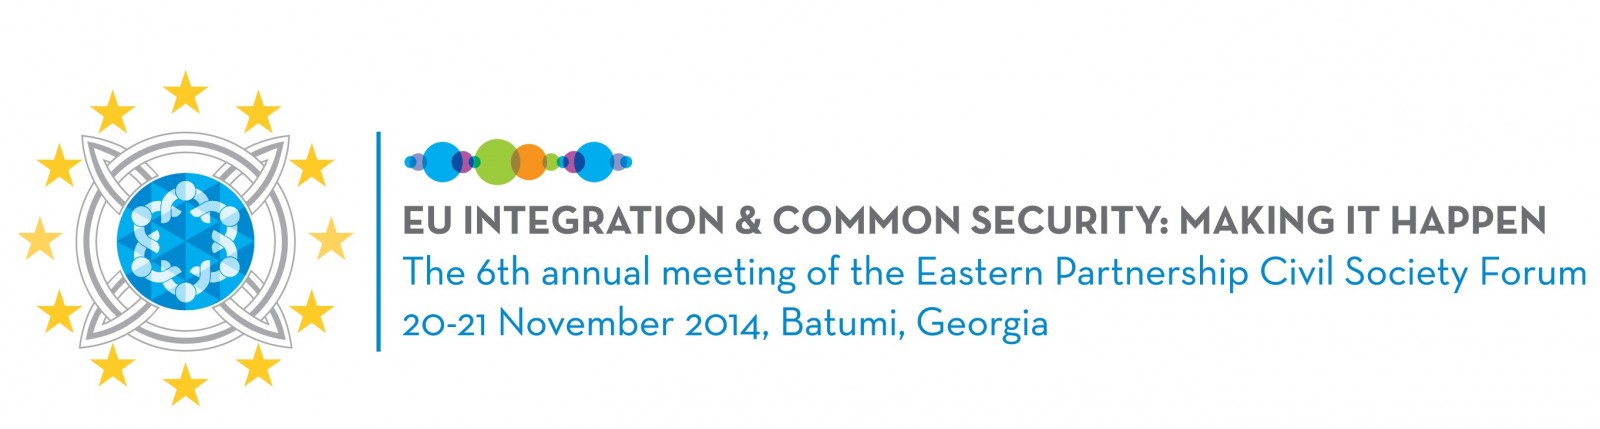 European Integration and Common Security: Making it Happen -  EaP CSF Assembly 2014